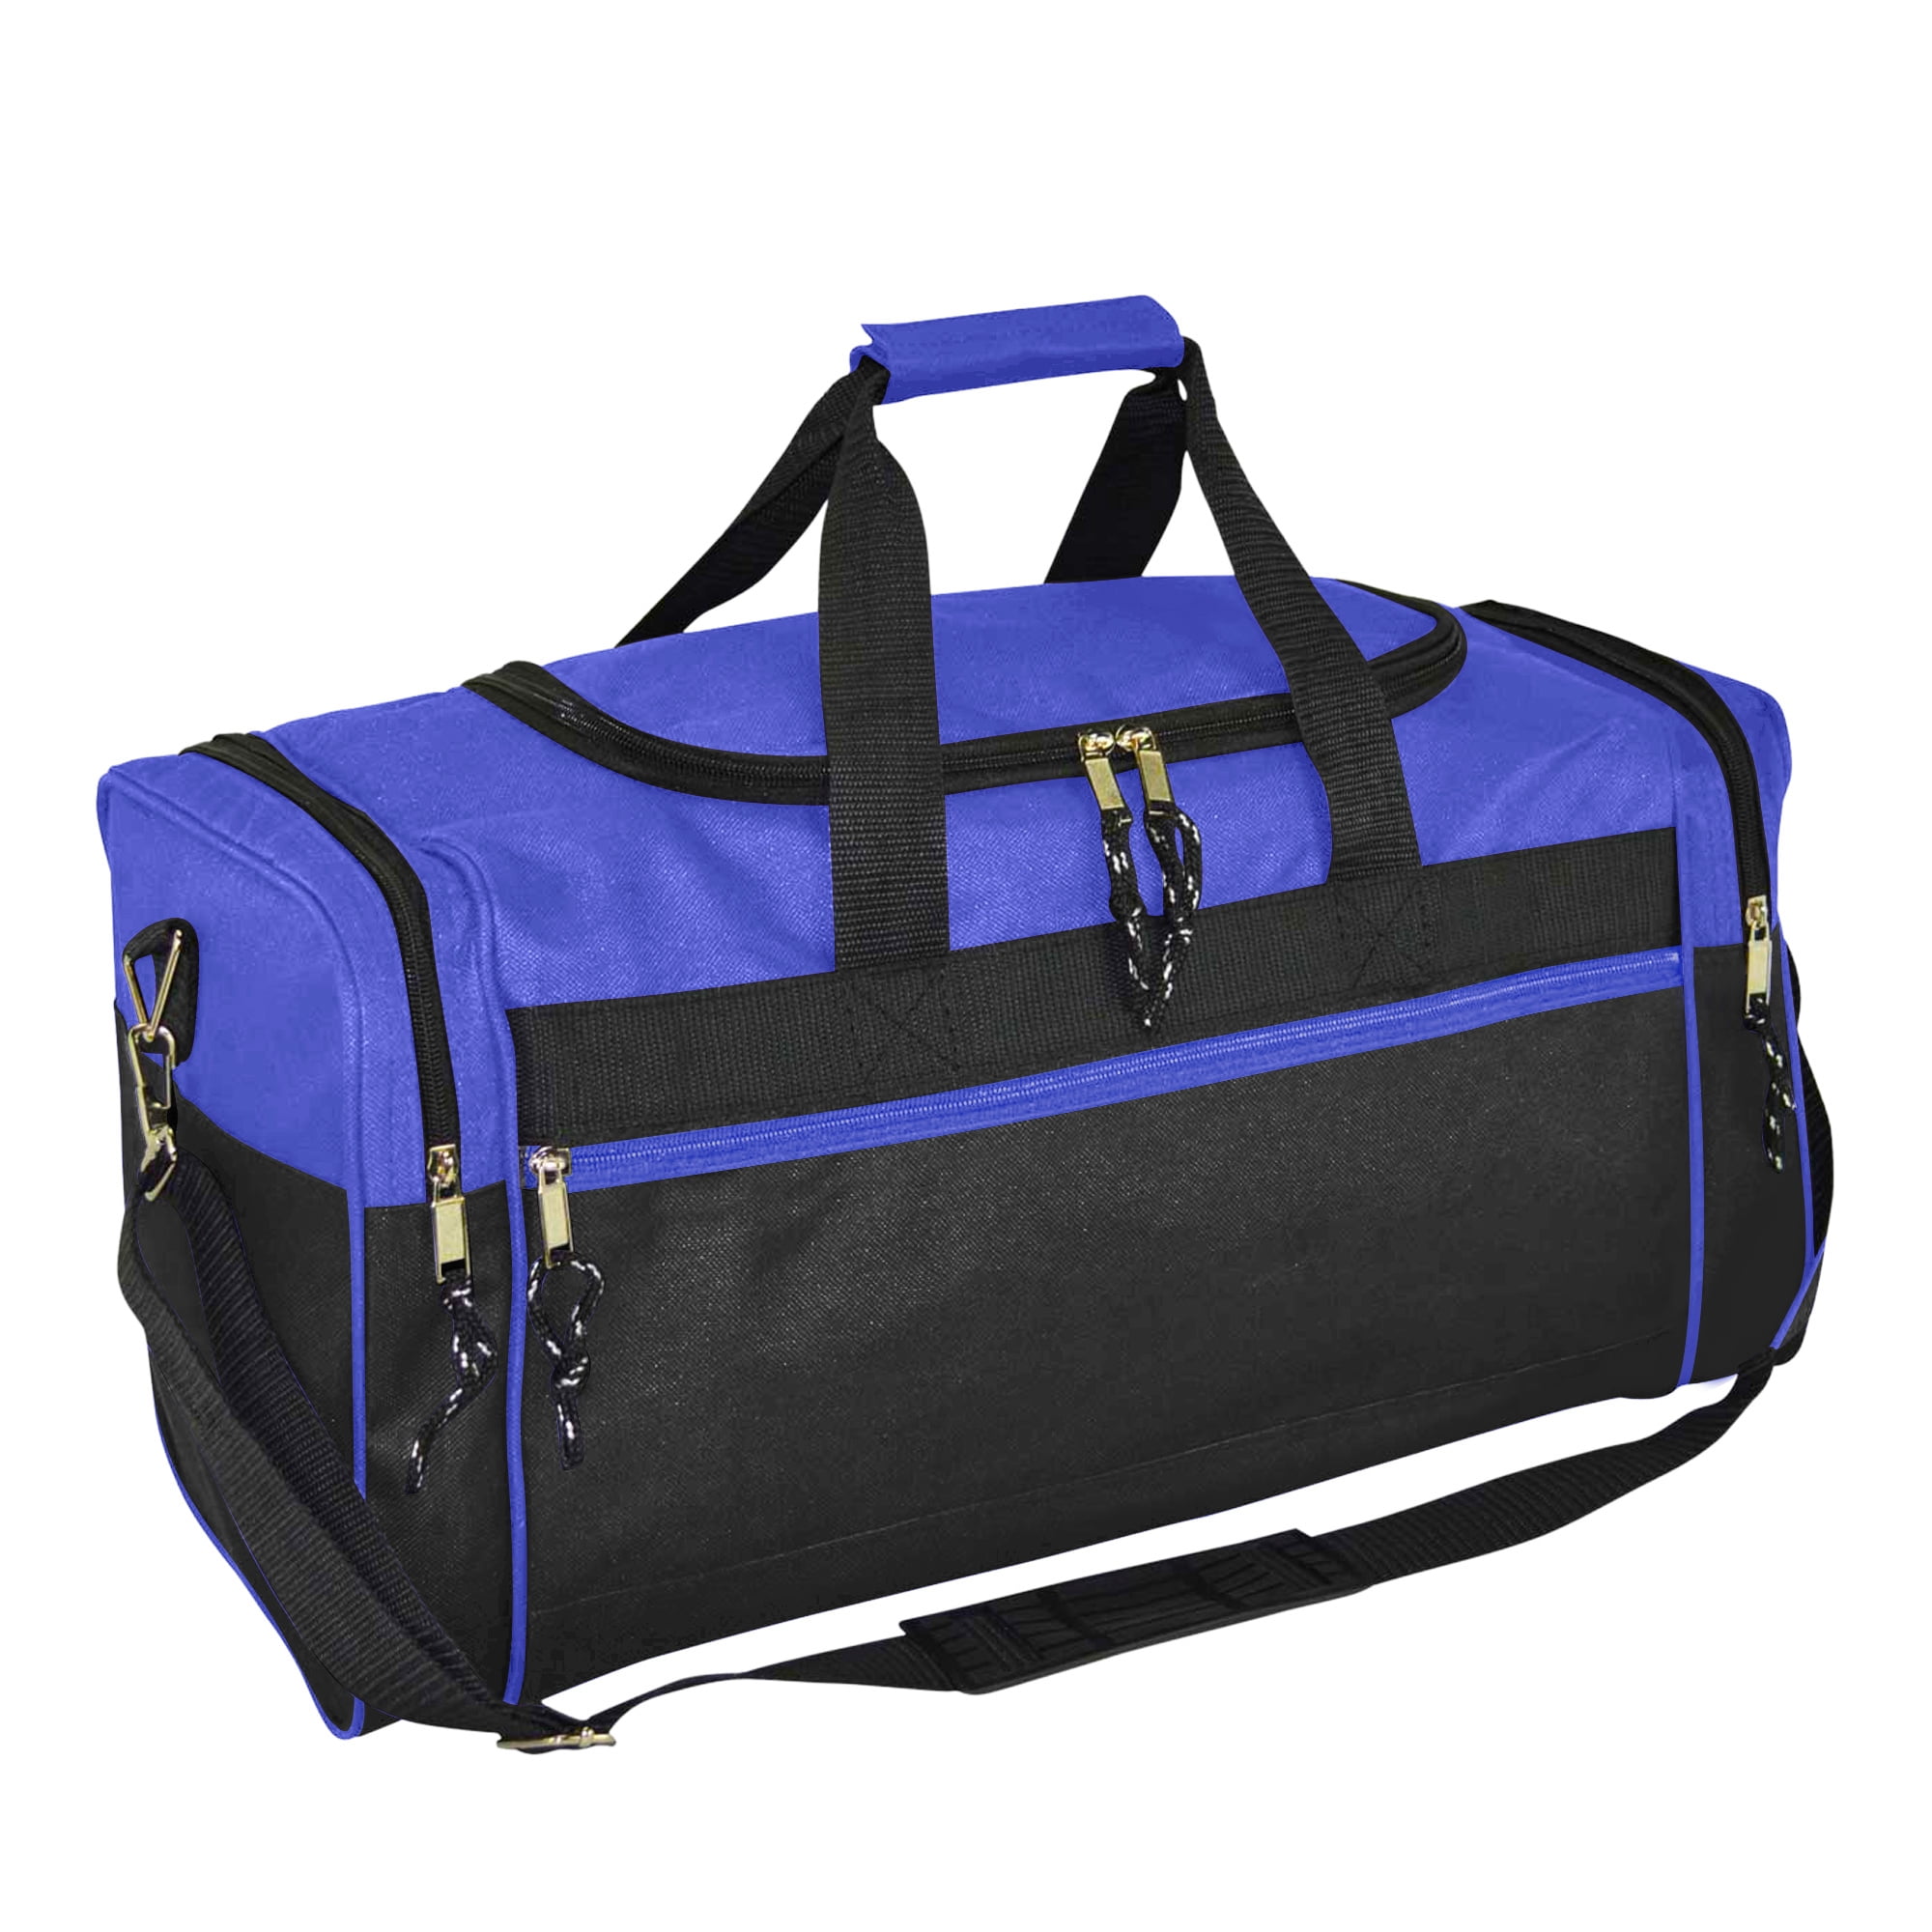 Exclusive Starter 21 Duffle Gym Bag